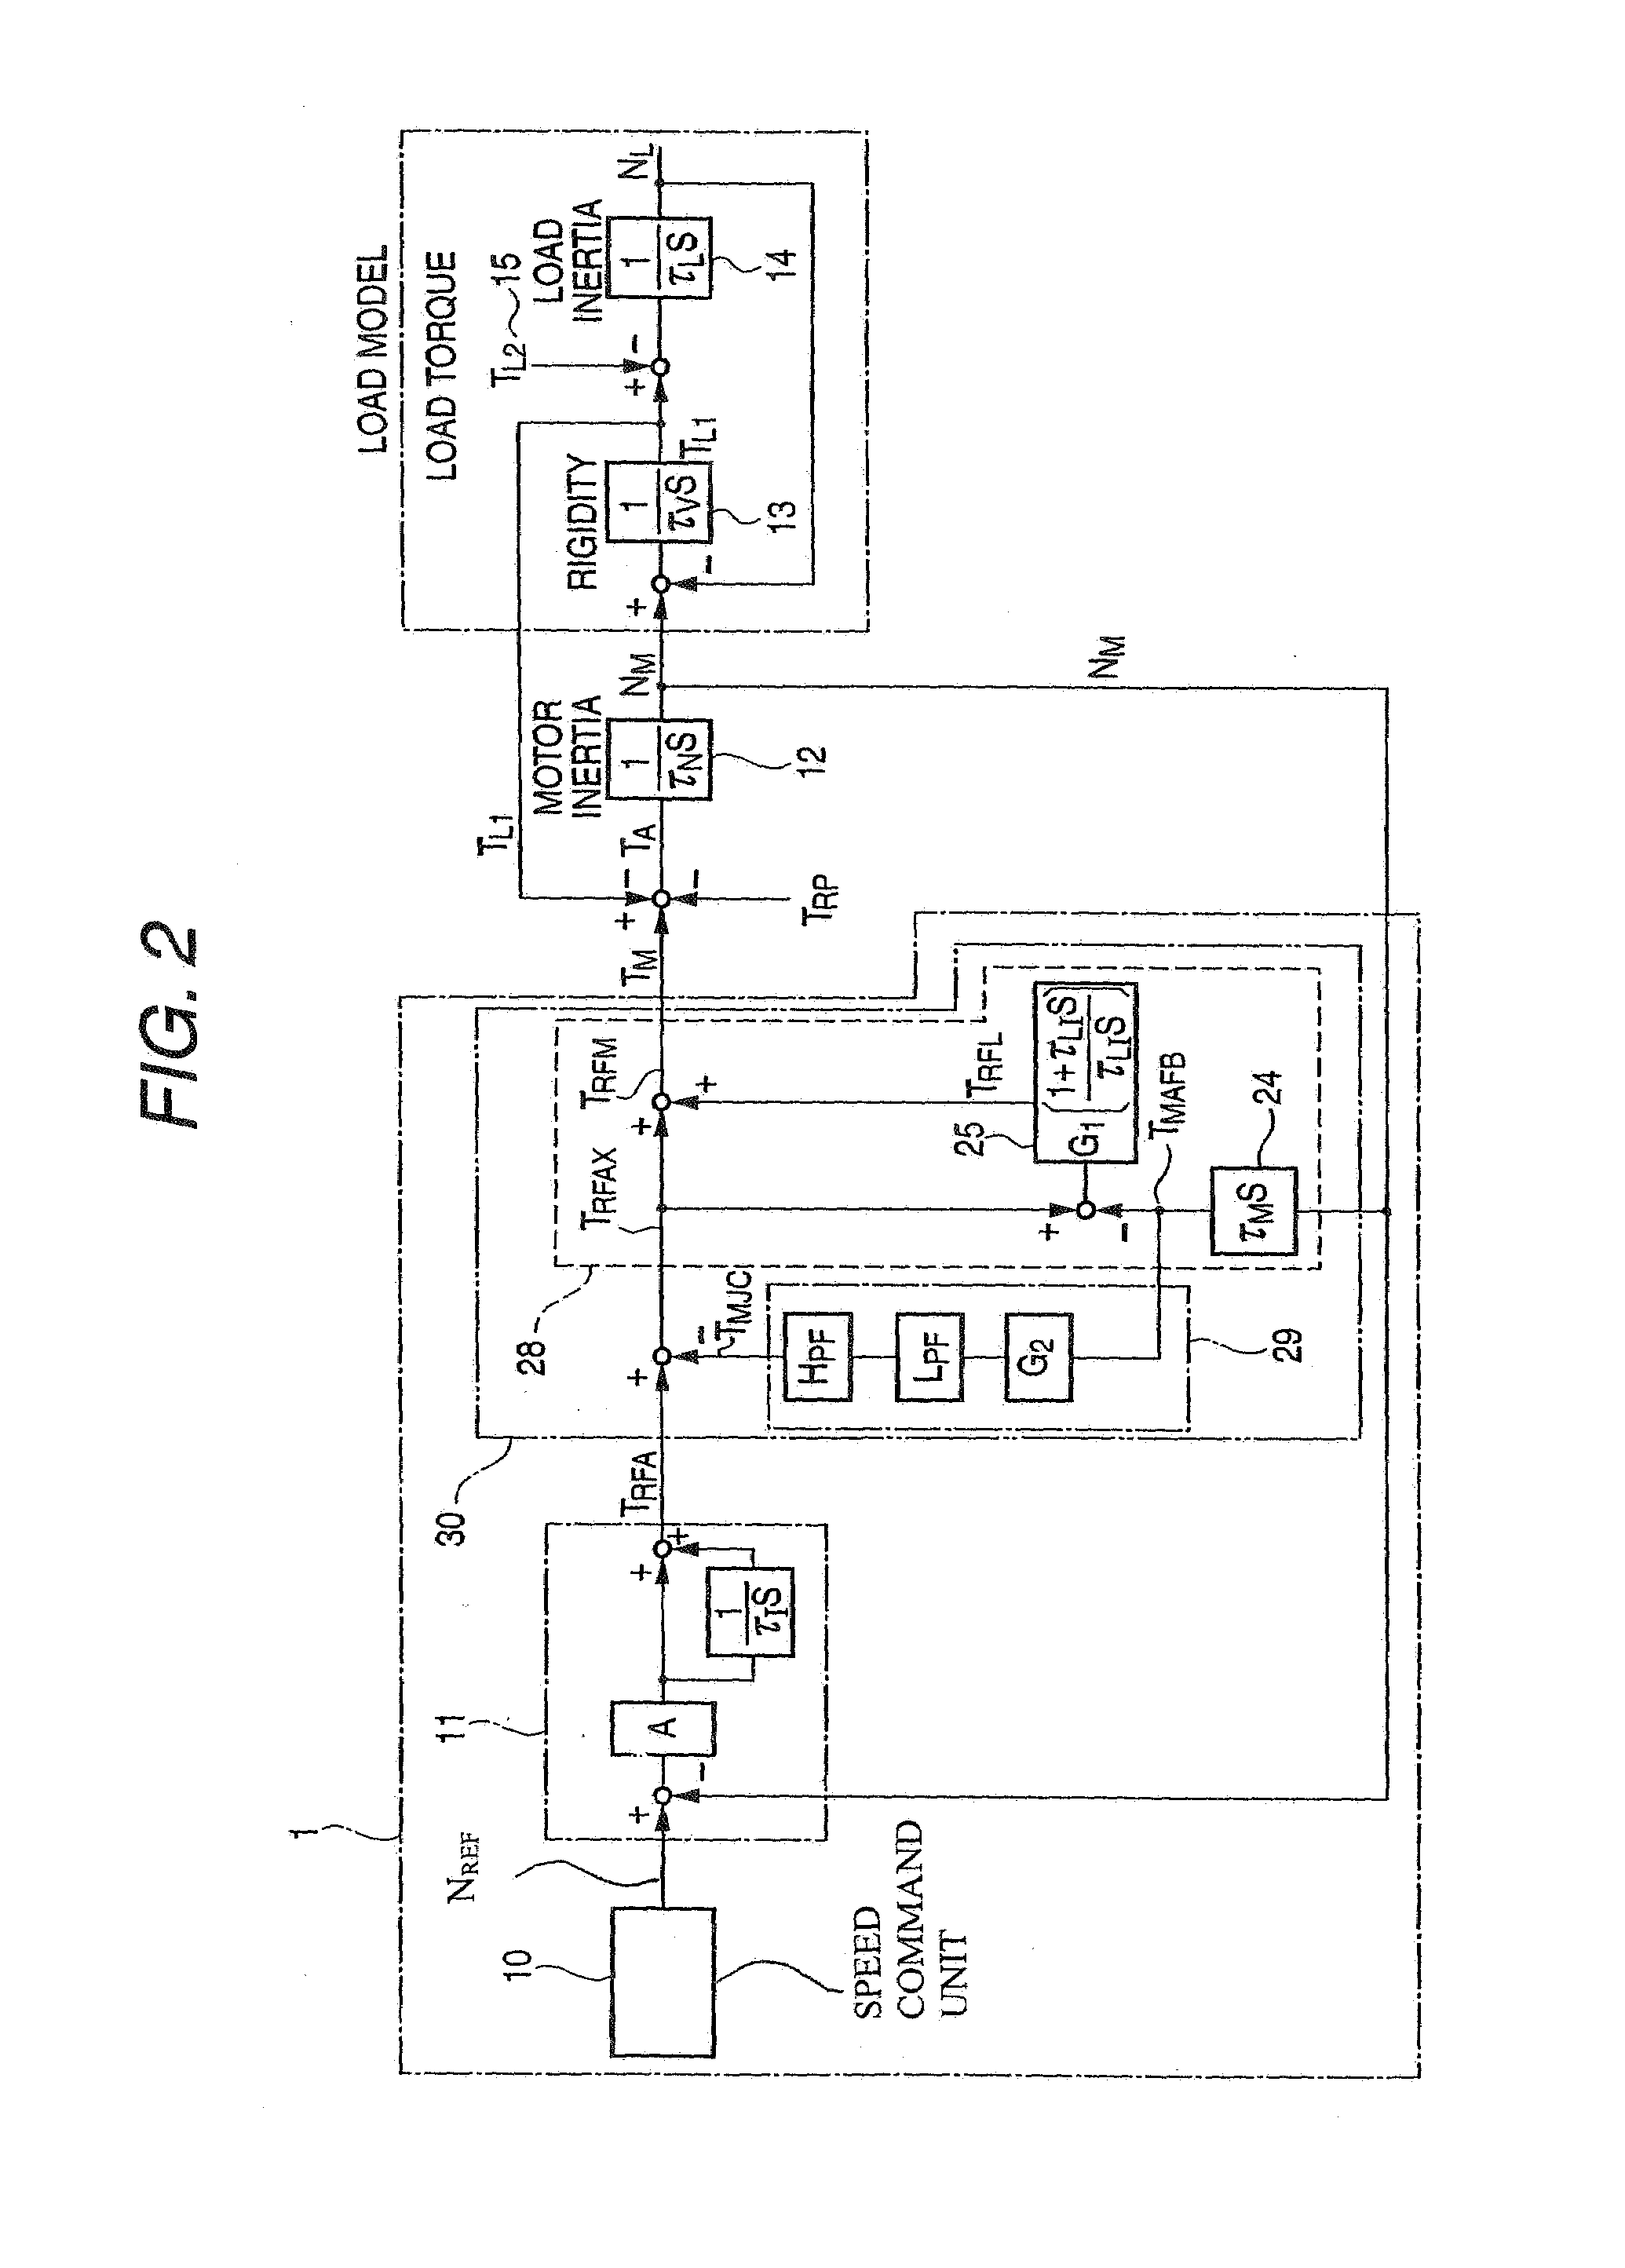 Torsional vibration suppressing method and apparatus in electric motor speed control system